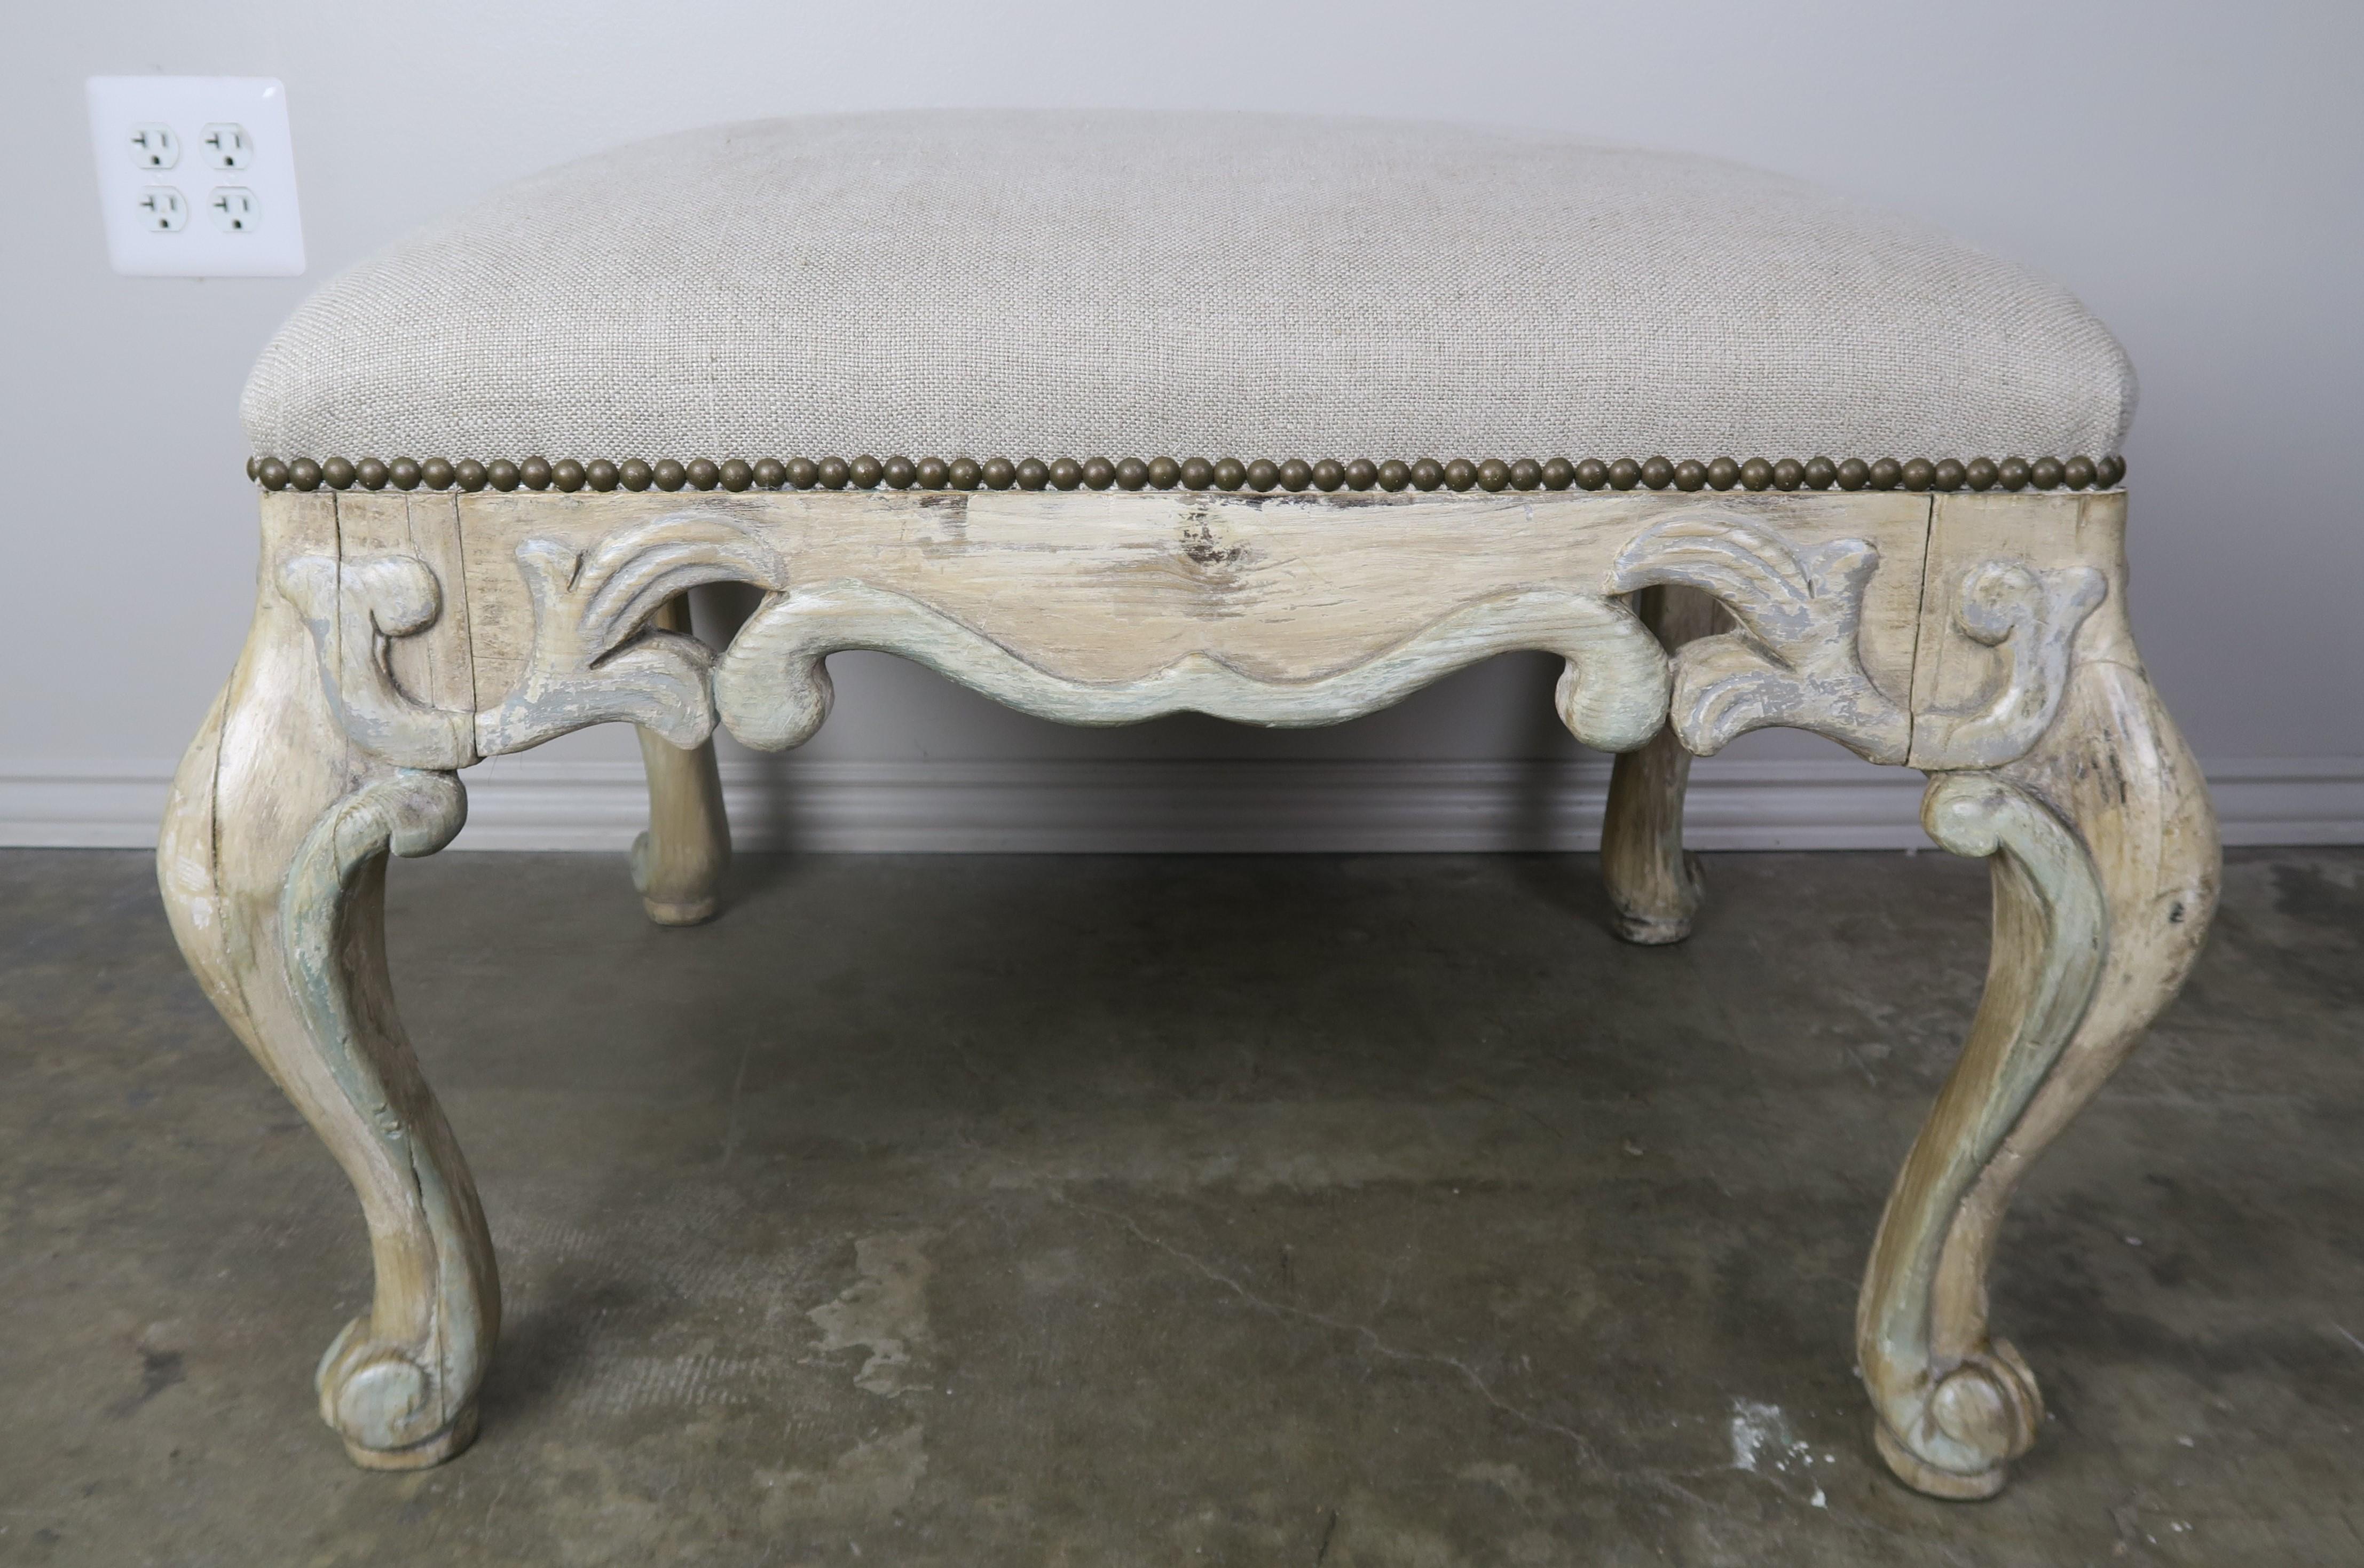 1930s French painted carved wood bench standing on four cabriole legs with ram's head feet. The bench is newly upholstered in washed linen with antique brass nailheads.